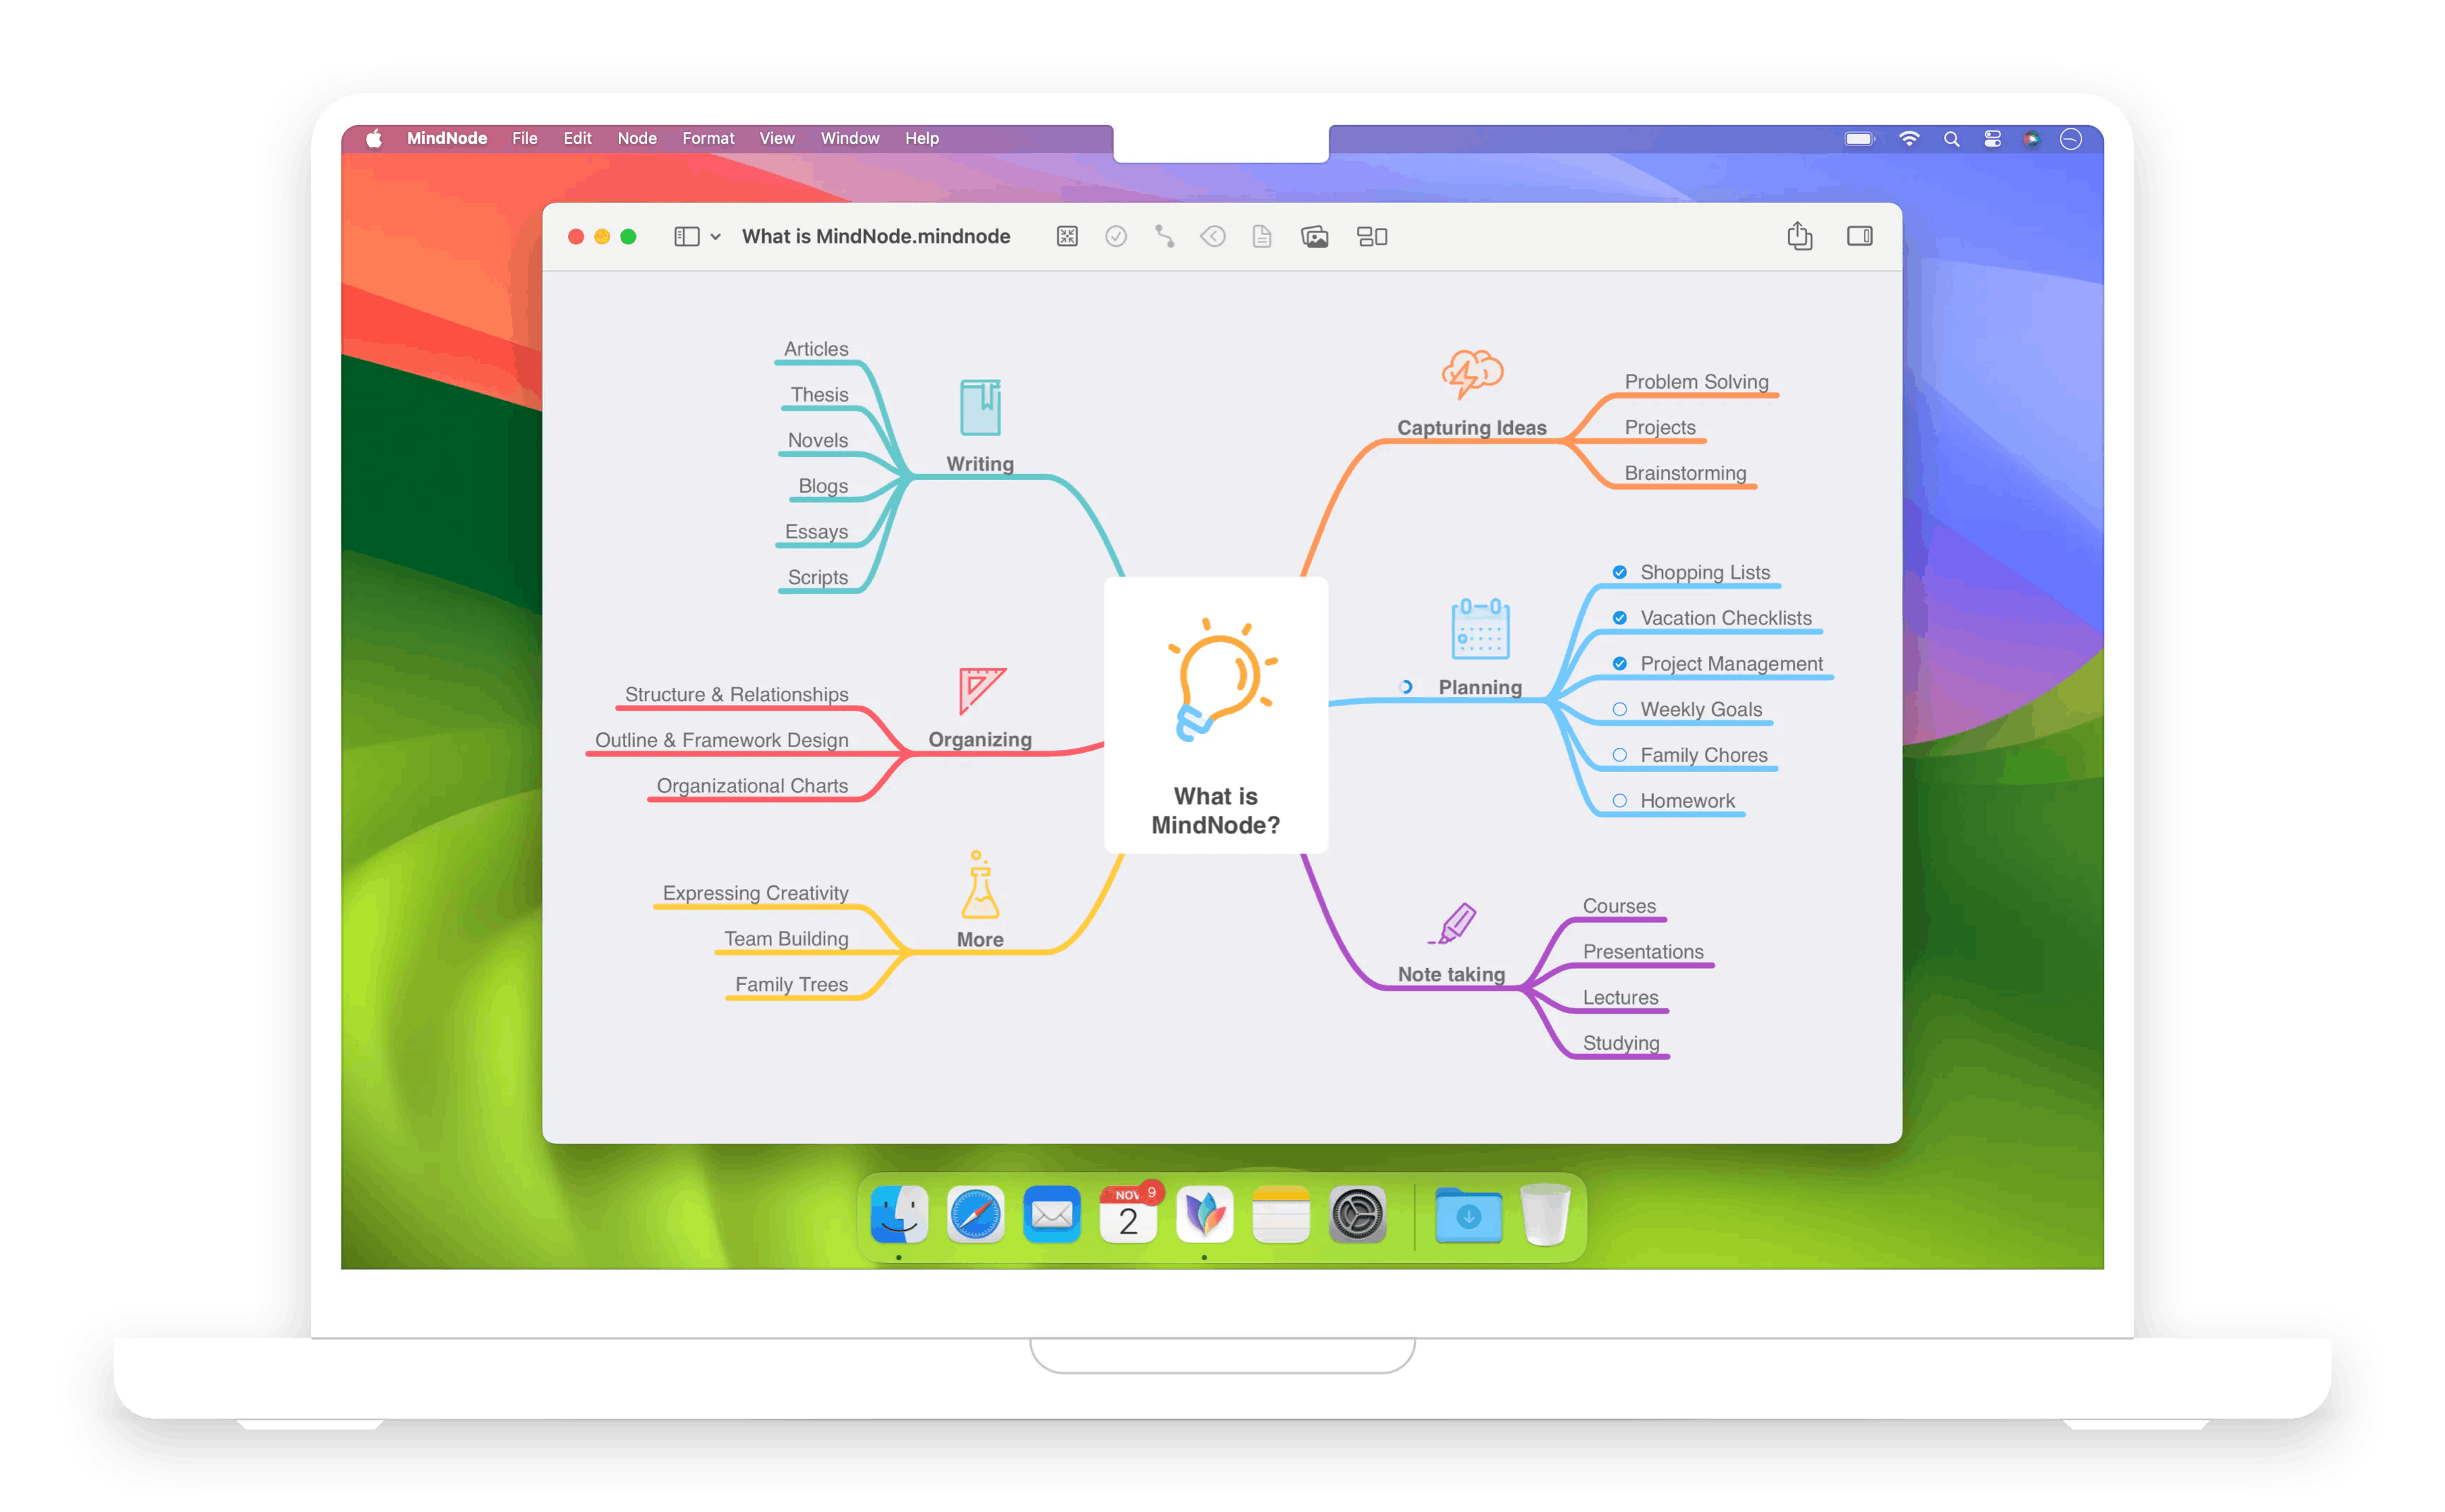 Laptop displays the MindNode interface, a "What is MindNode" mind map, and its corresponding outline in the sidebar menu. The mind map is organized into six sections including, Writing, Capturing Ideas, Planning, Organizing, Note Taking, and More, with additional details branching off from each category.